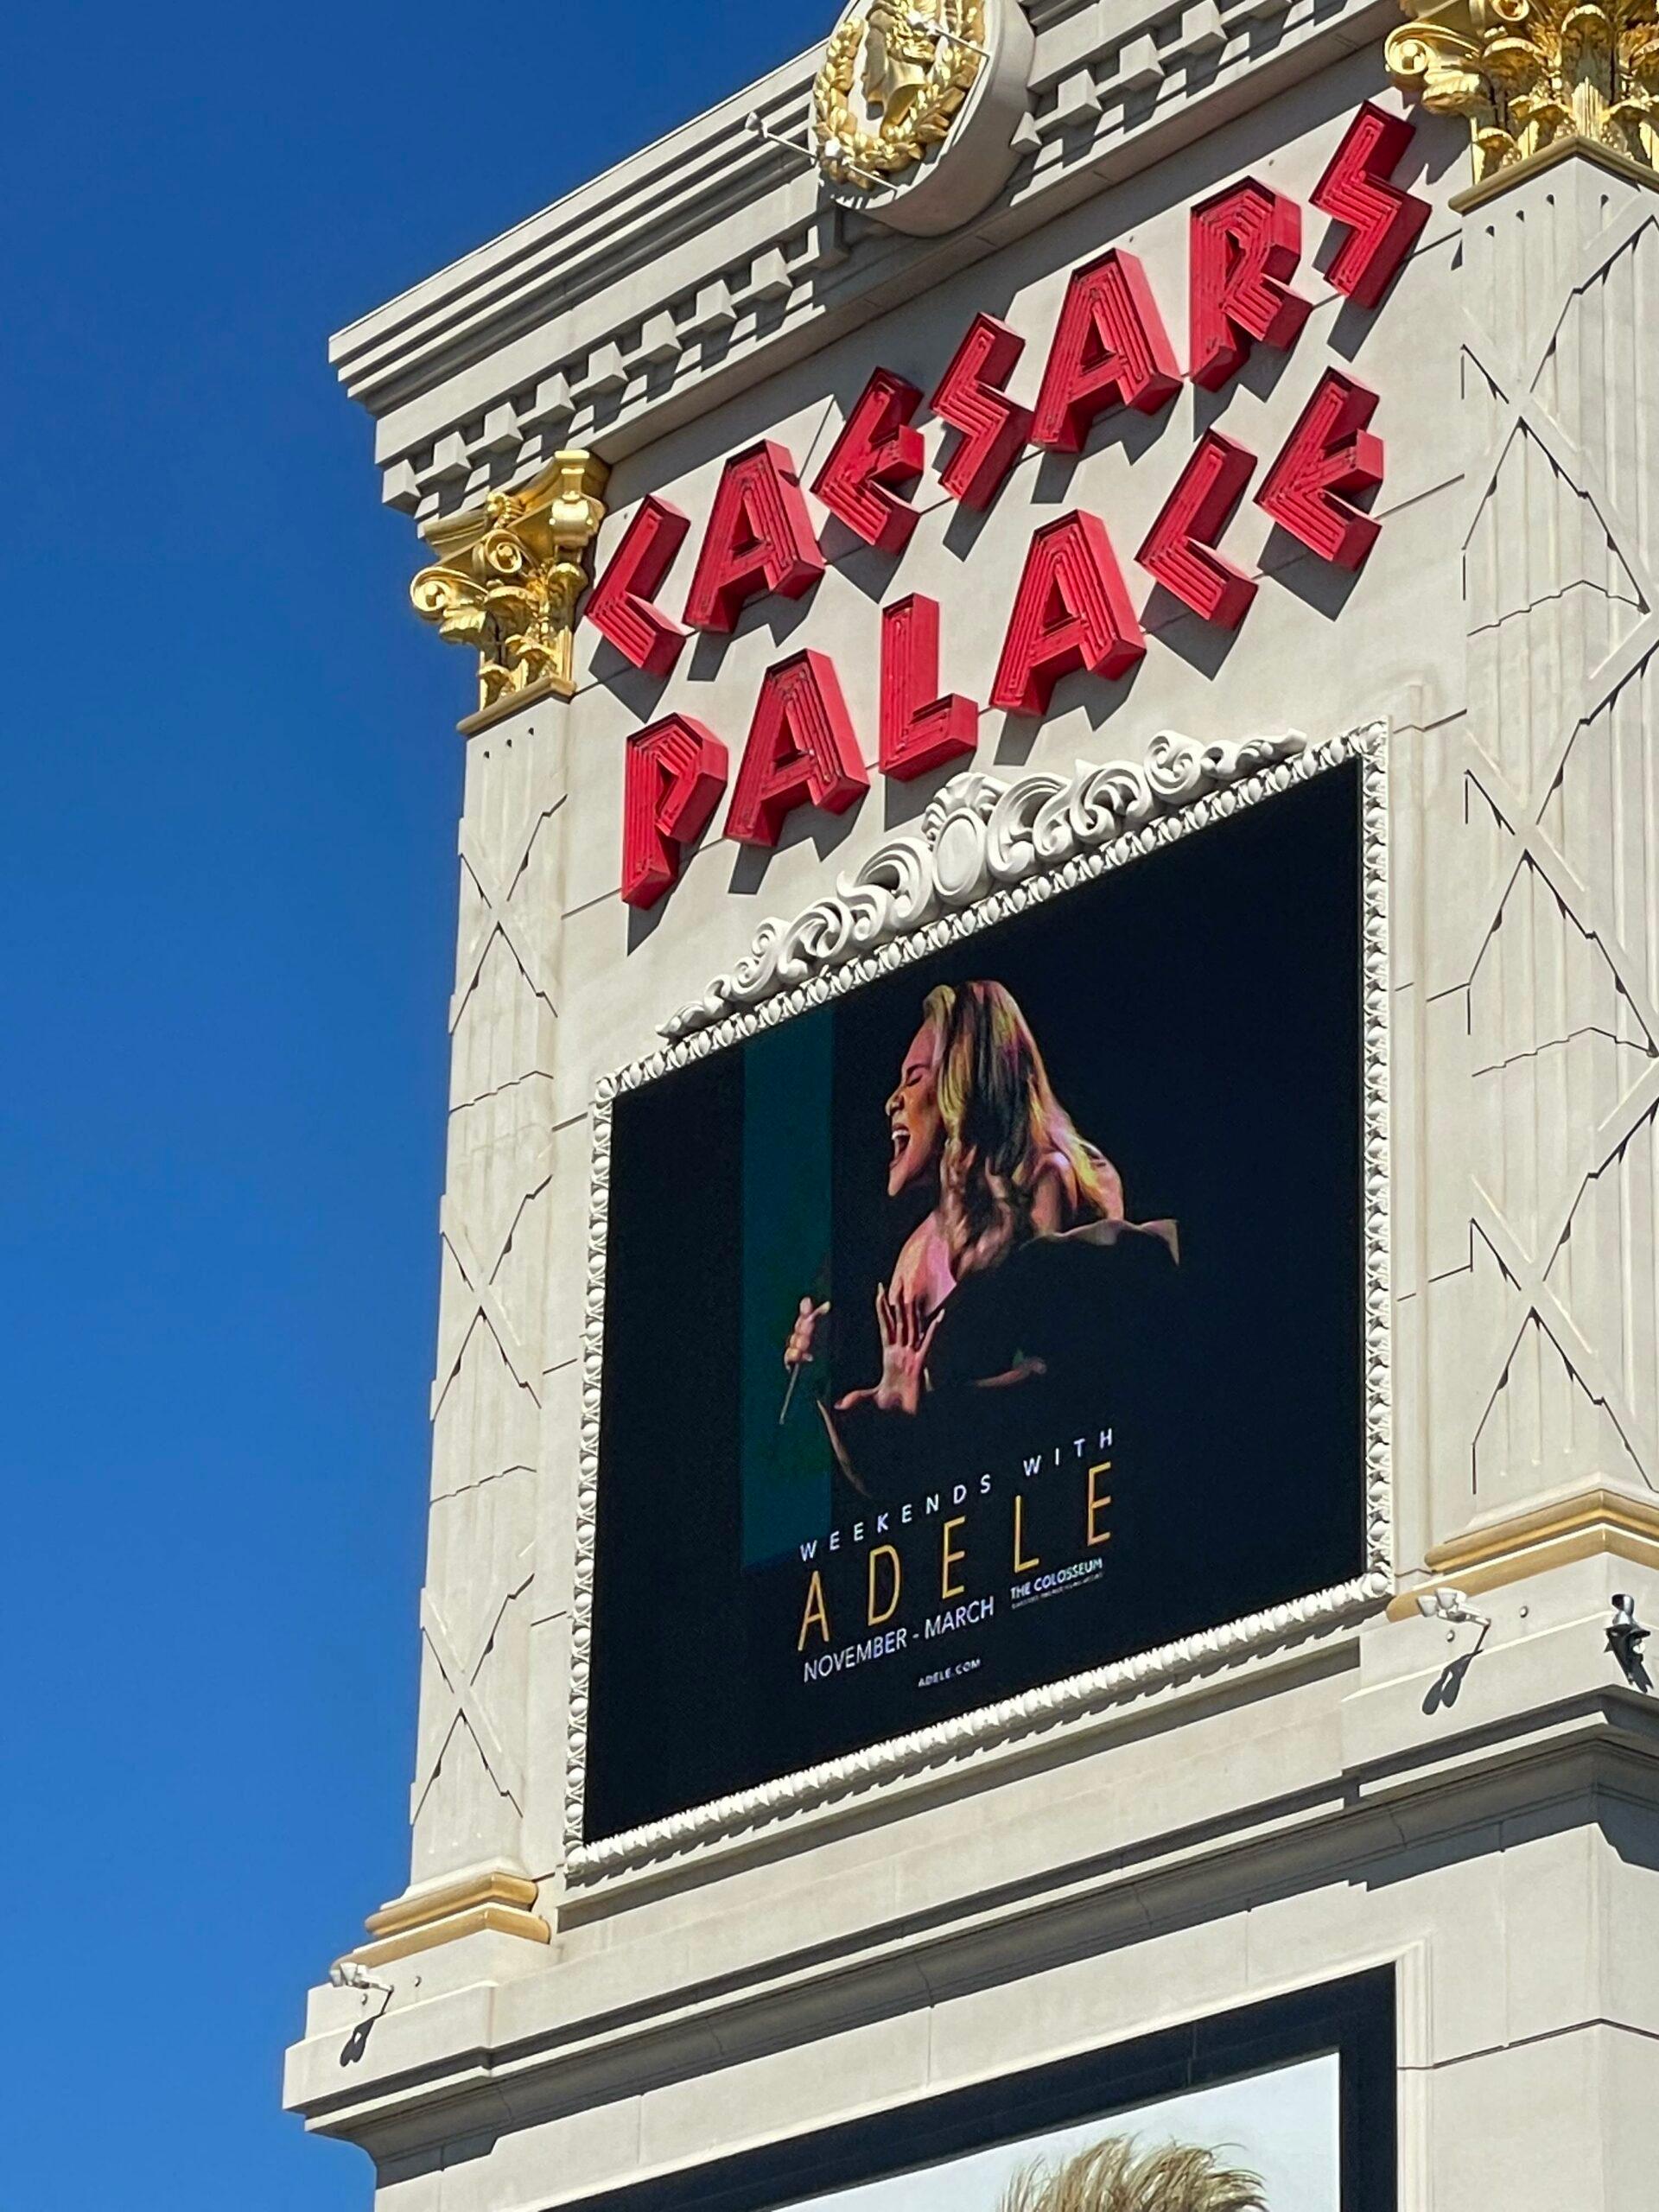 Scene at hotel where Adele is visiting in Las Vegas this weekend and views of her rumored luxury mega suite at Cesars Palace